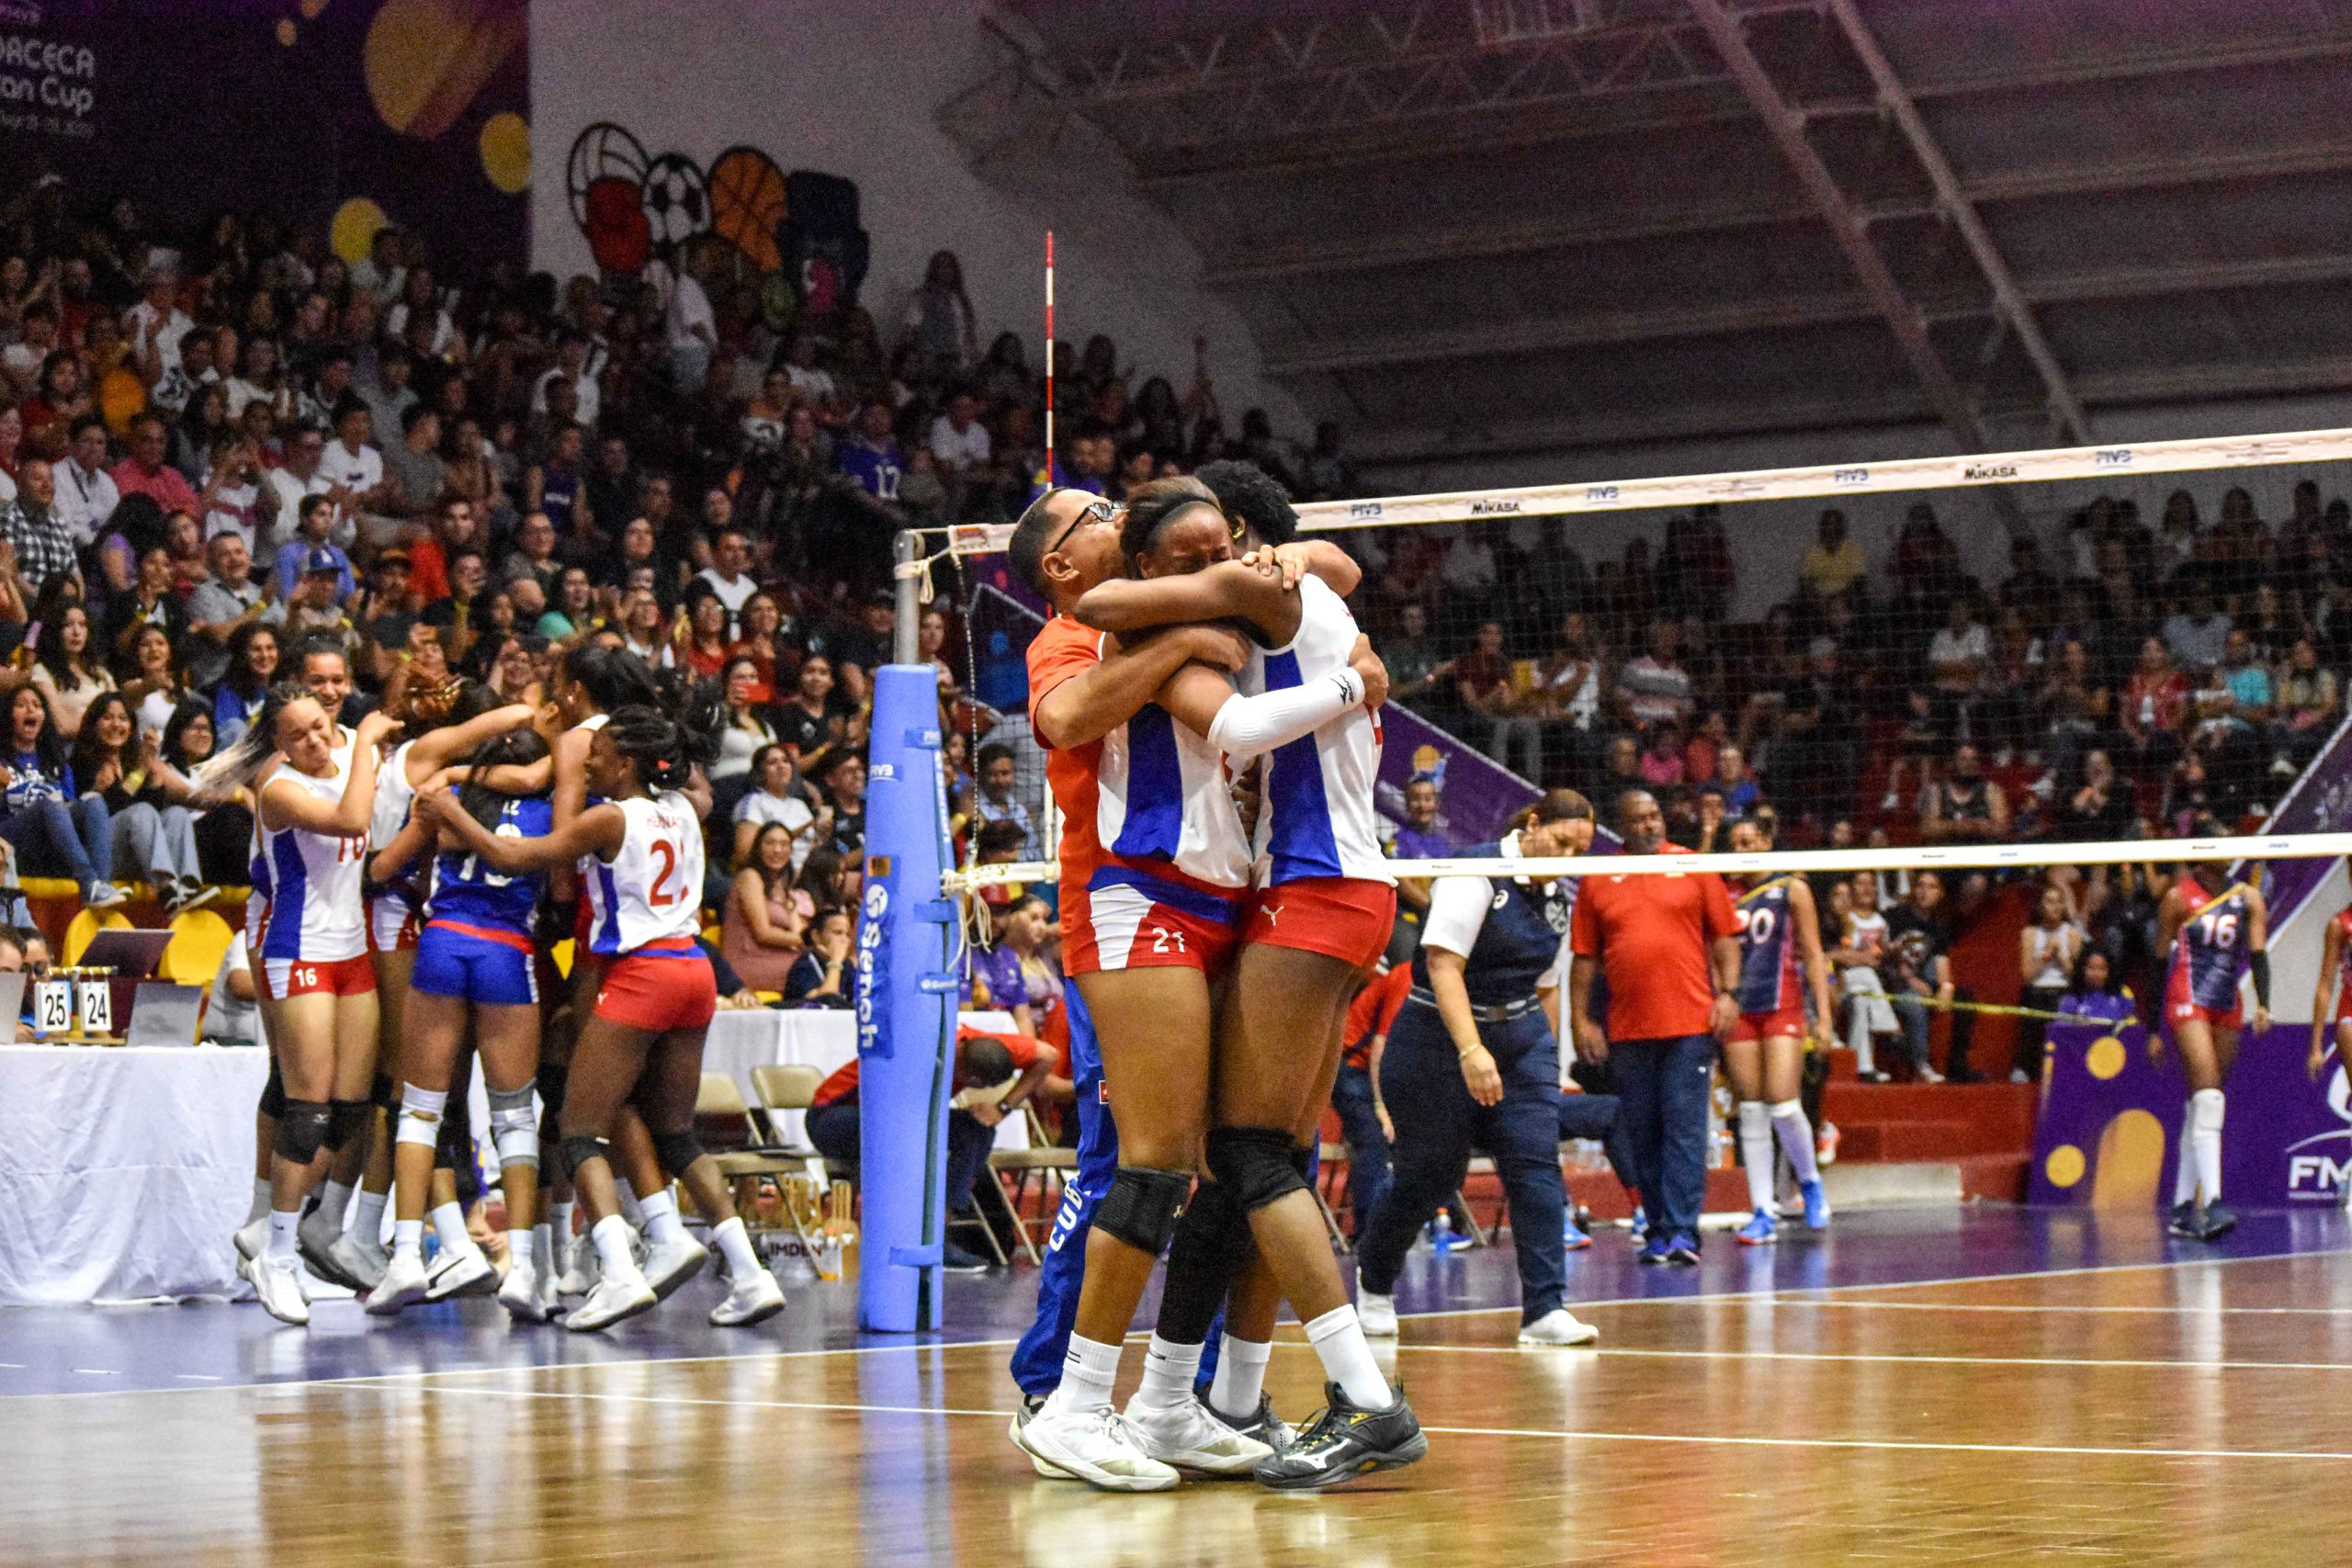 Cuba downs Dominican Republic for the Bronze Medal